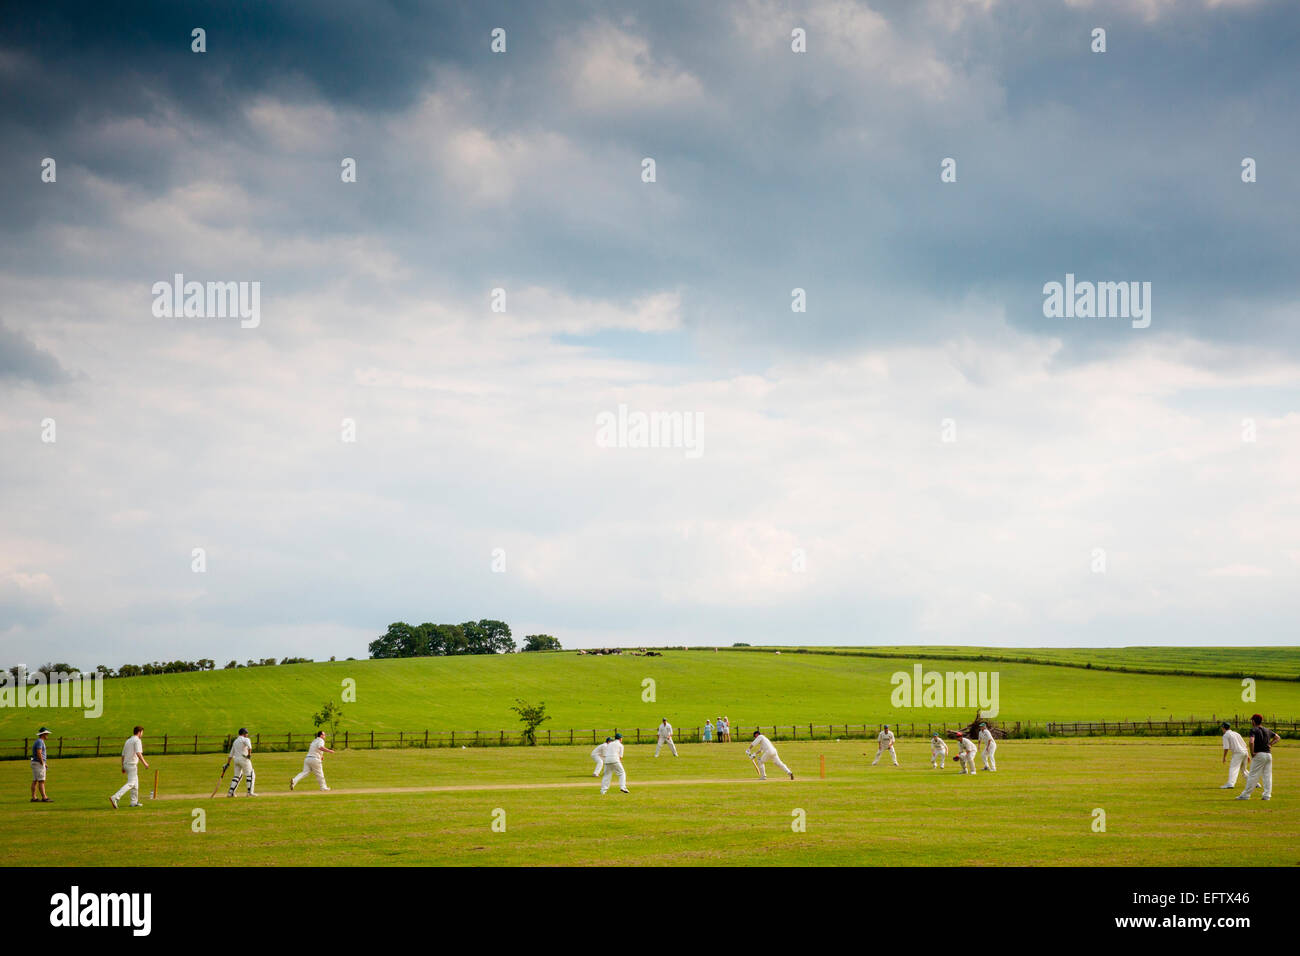 Rural scene with view cricket players playing cricket match on cricket field Stock Photo